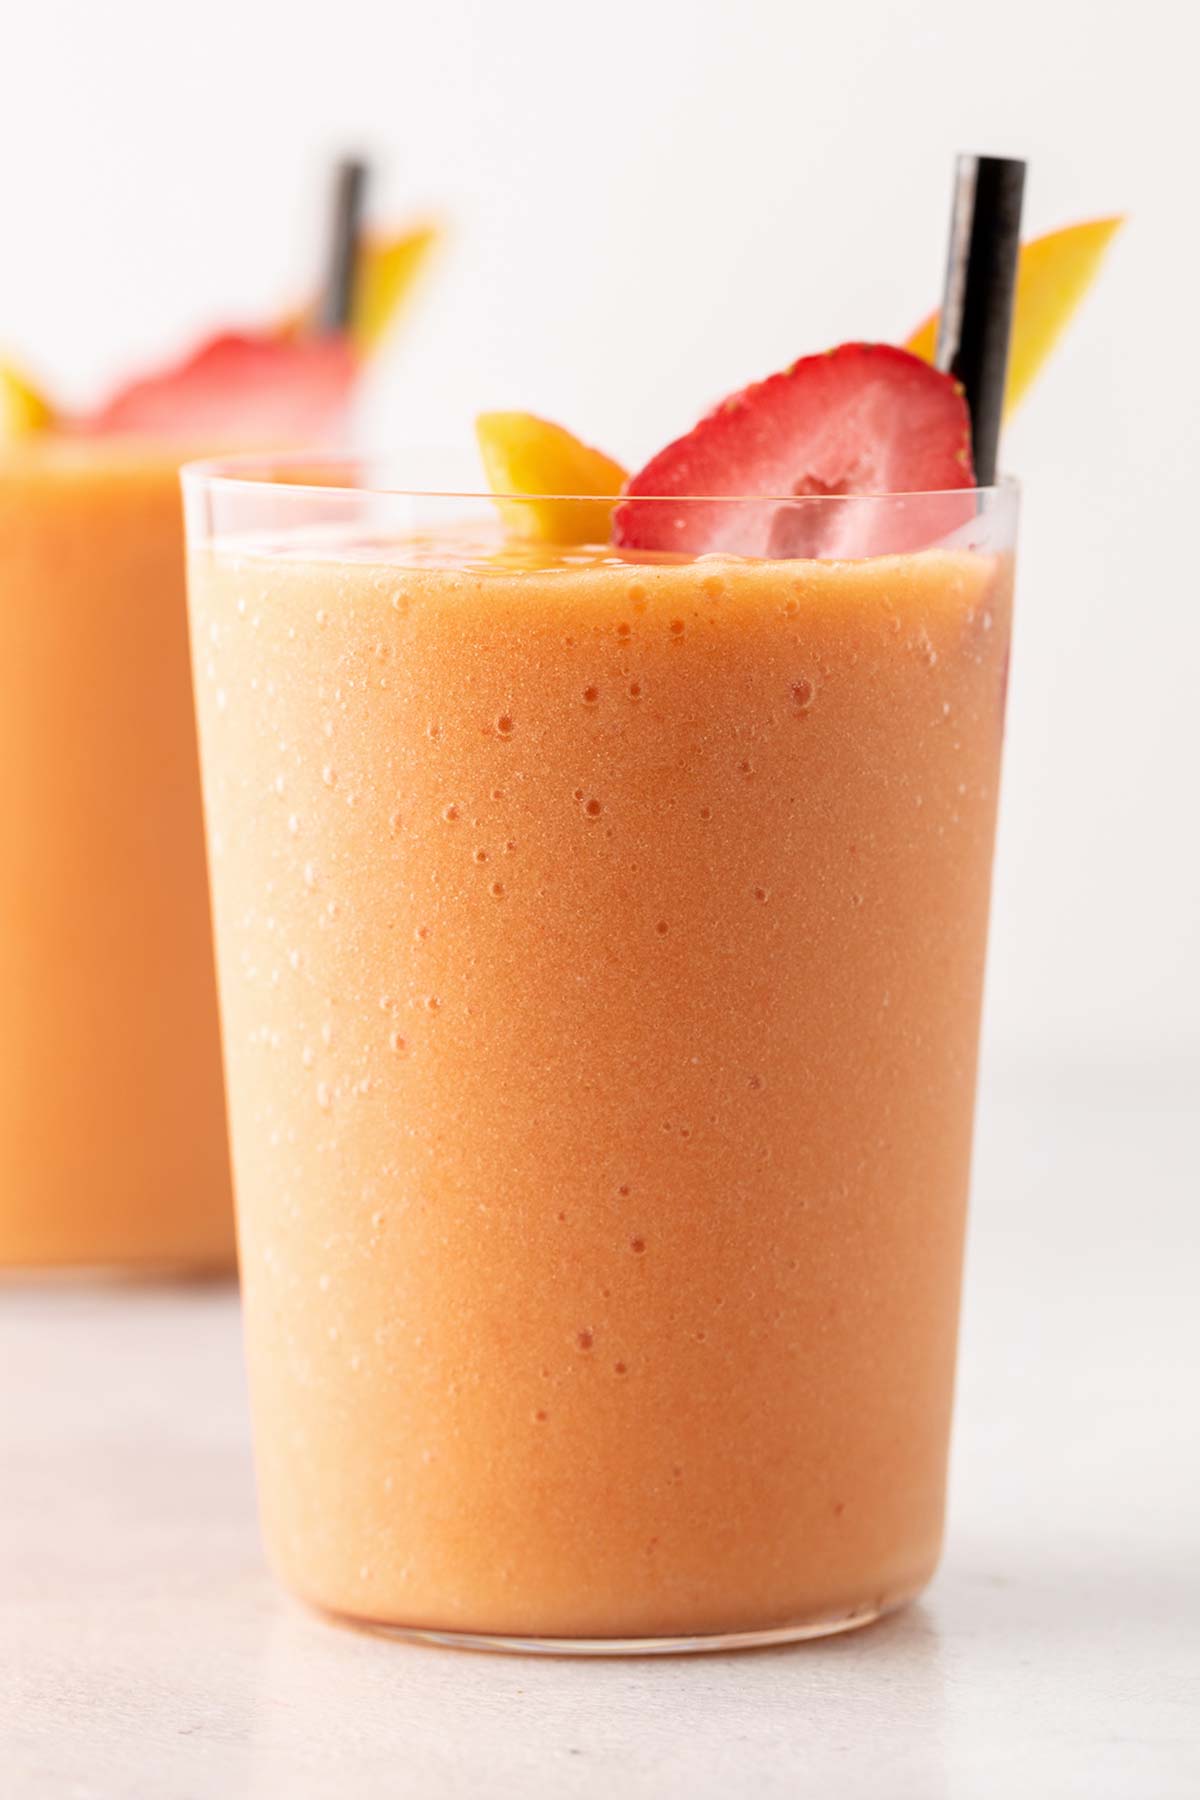 Fruit smoothie in a glass.